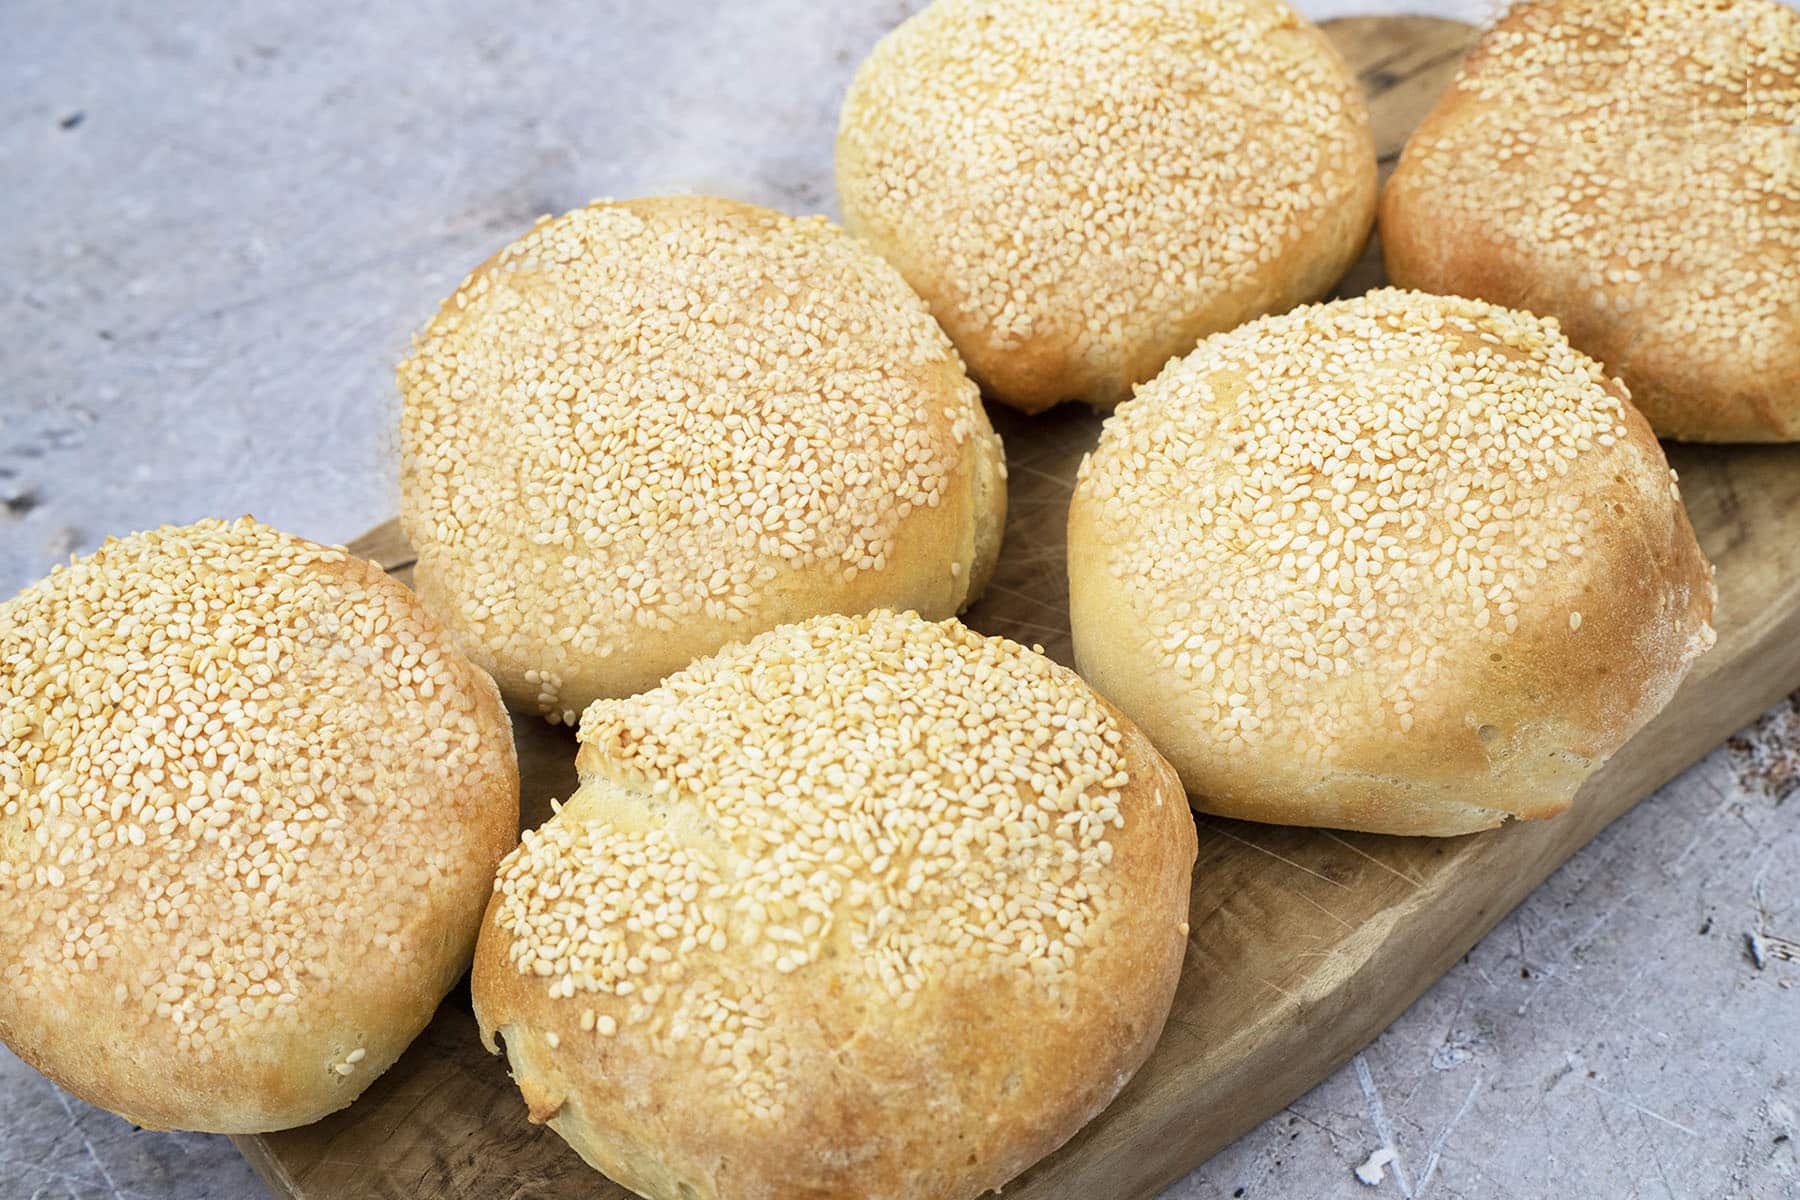 white bread rolls covered in sesame seeds on board